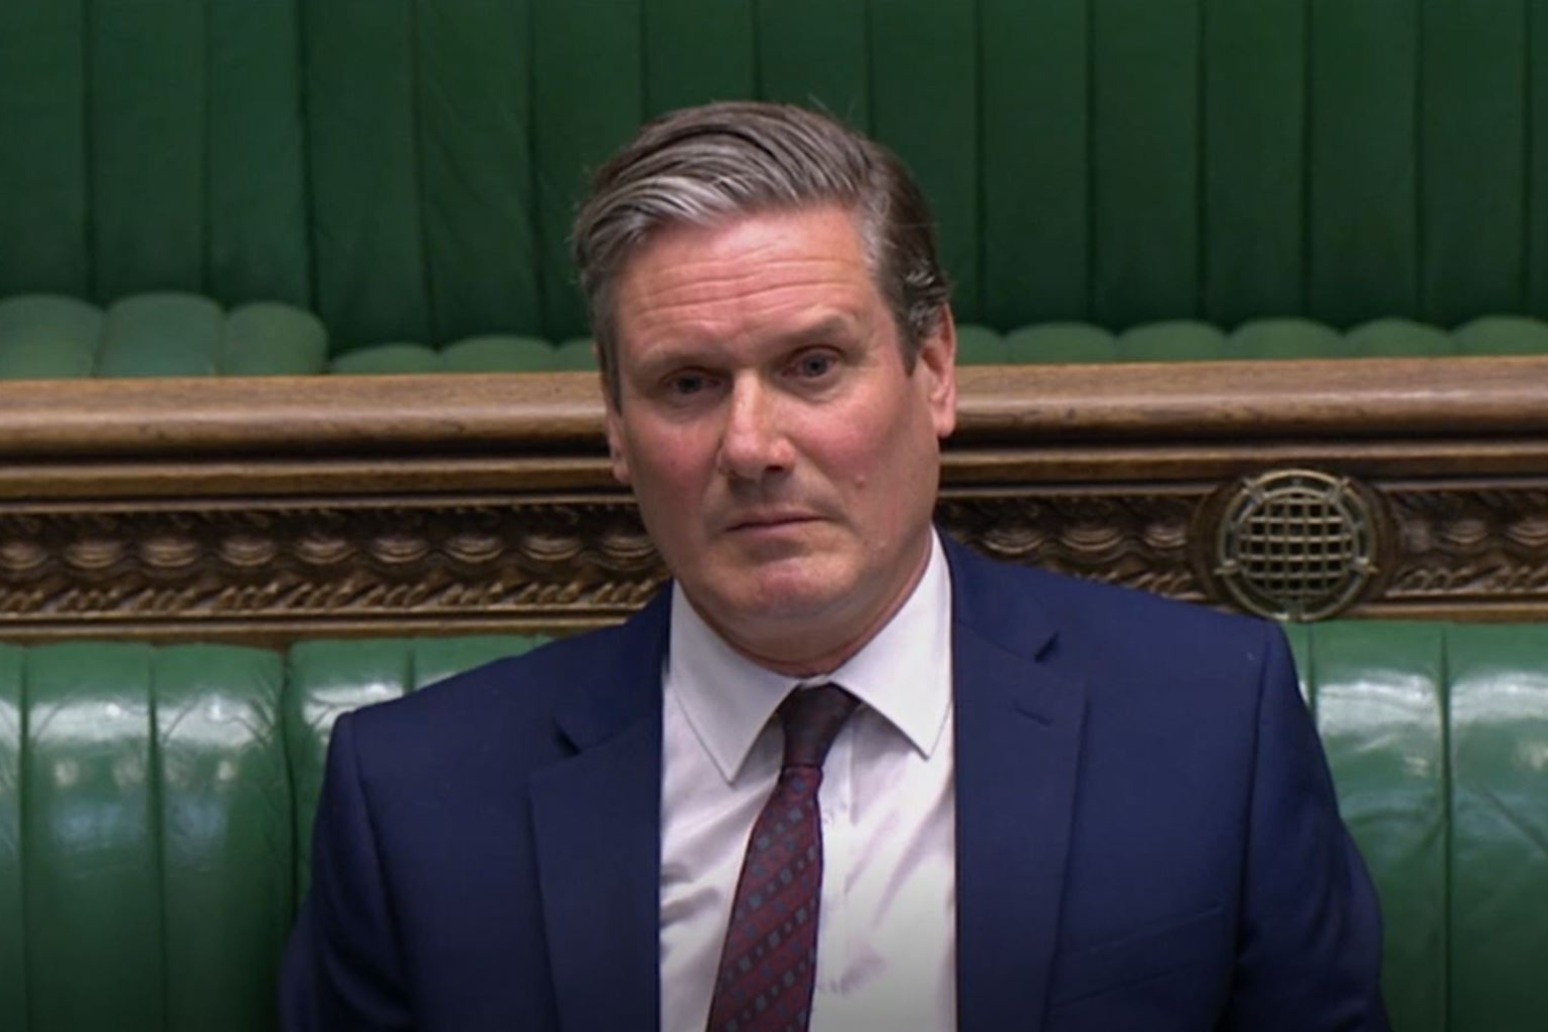 Keir Starmer admits that now is “not a time for party politics” after Reading attacks 